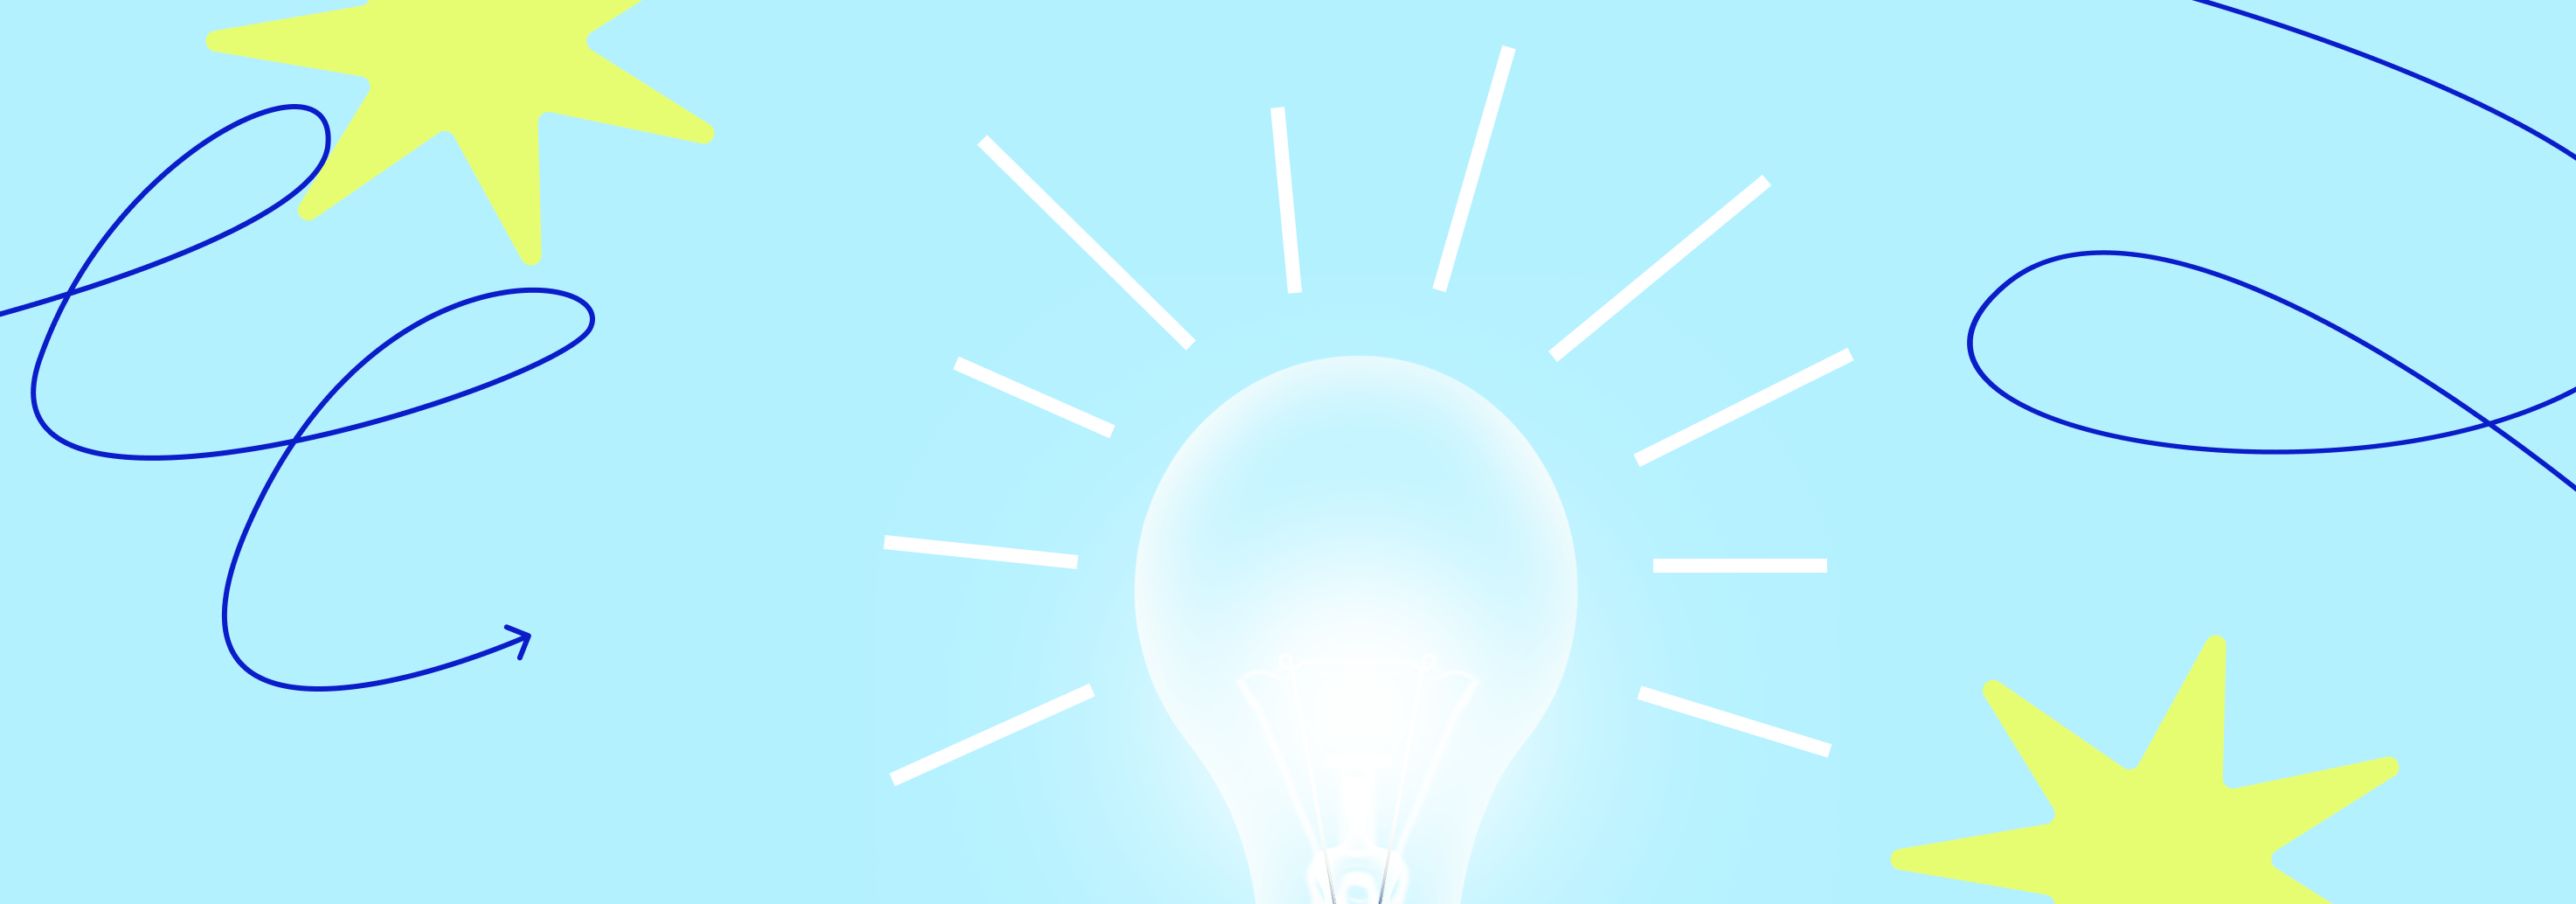 Image includes a white lightbulb graphic on a cyan background with star and scribble graphics to the side